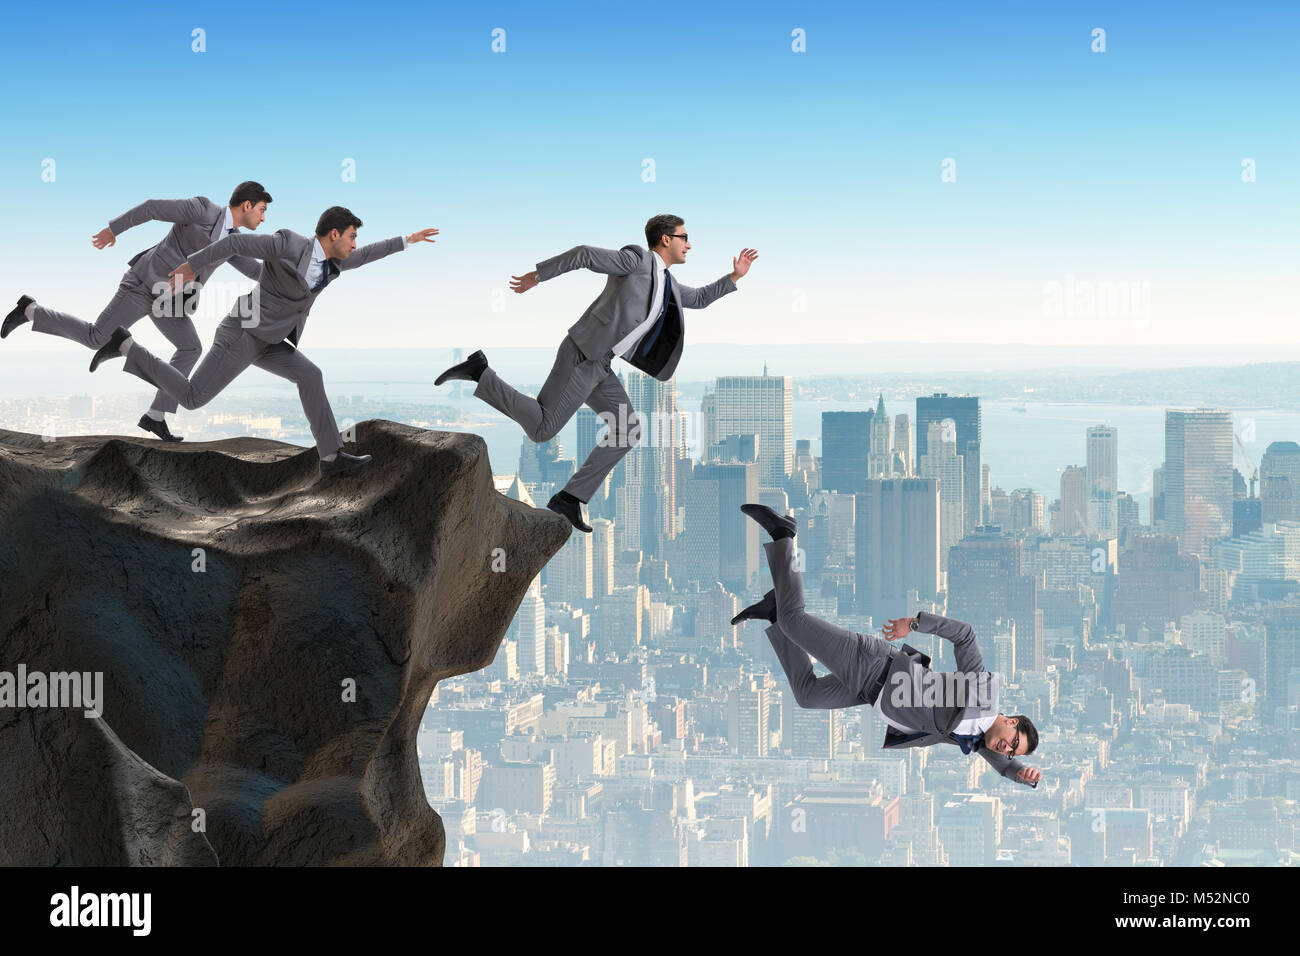 653 Man Falling Off Cliff Images, Stock Photos, 3D objects, & Vectors